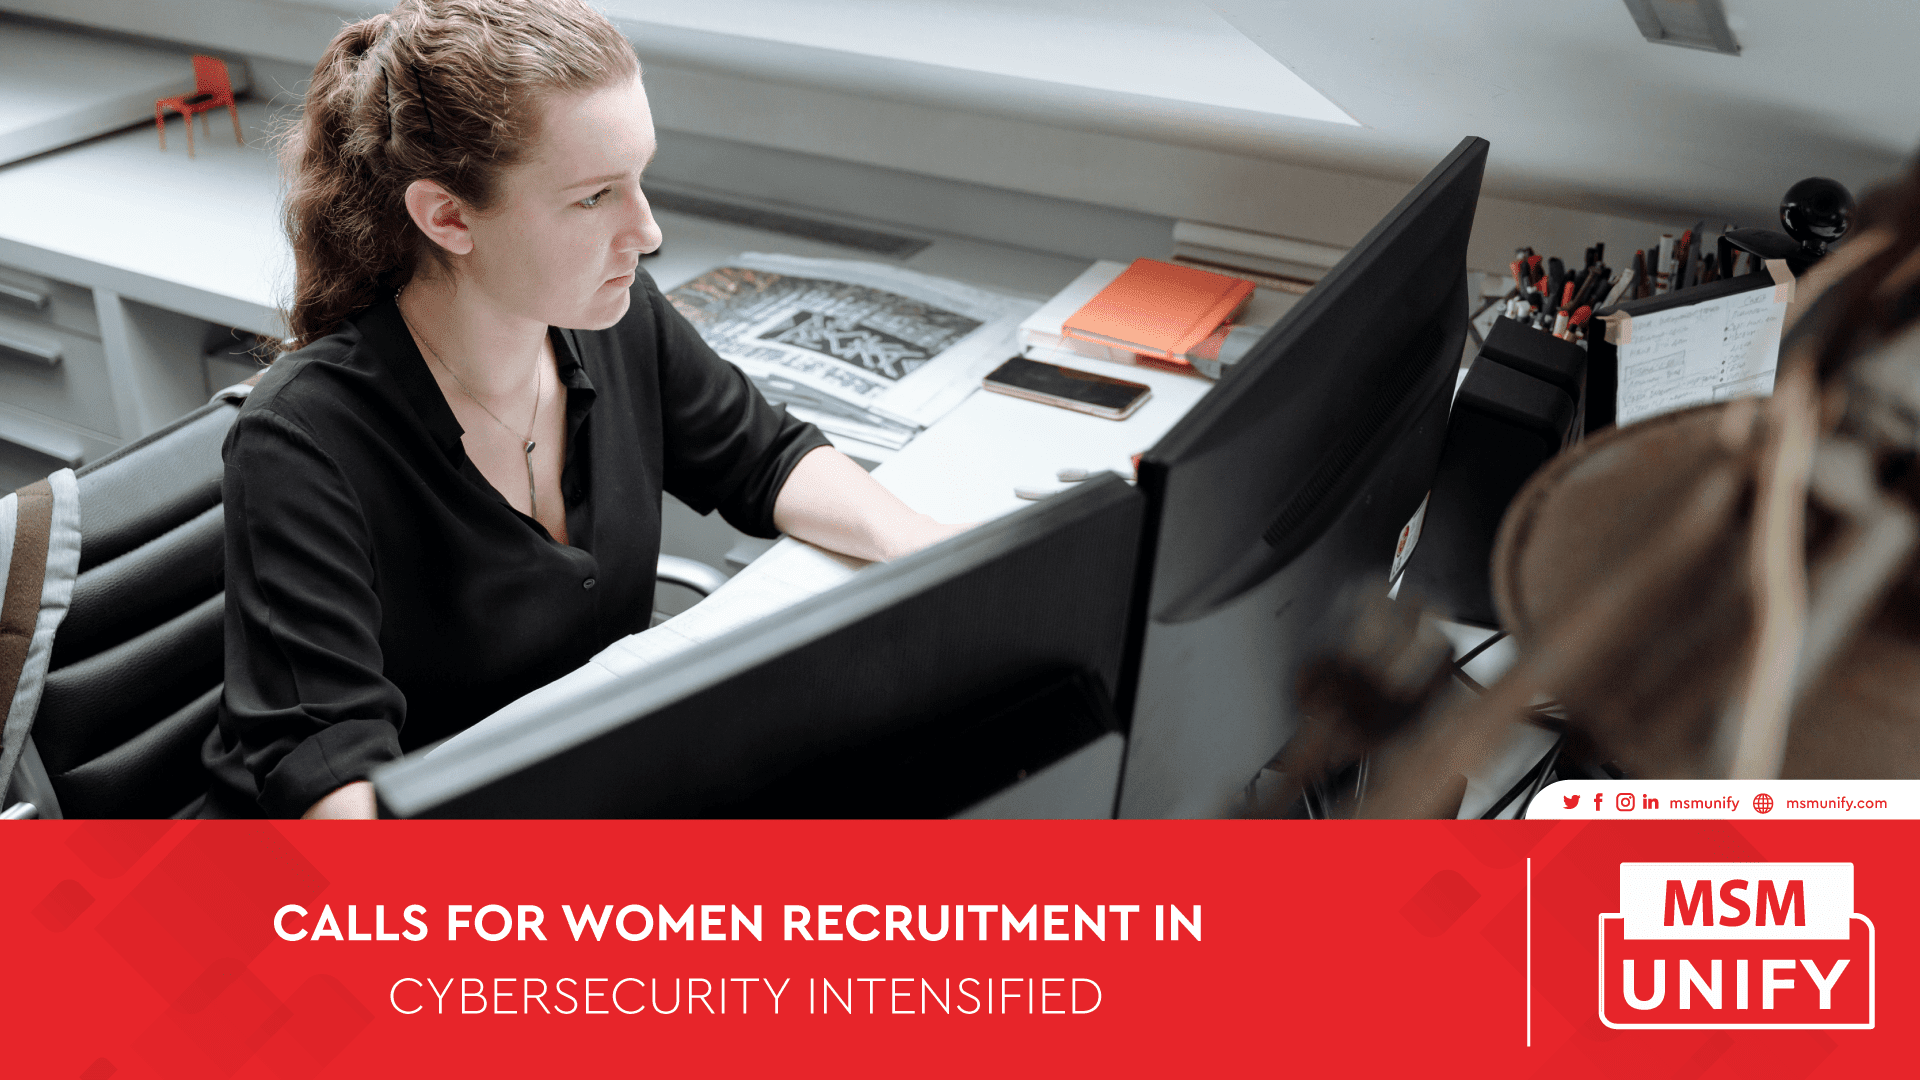 MSM Unify CALLS FOR WOMEN RECRUITMENT IN CYBERSECURITY INTENSIFIED